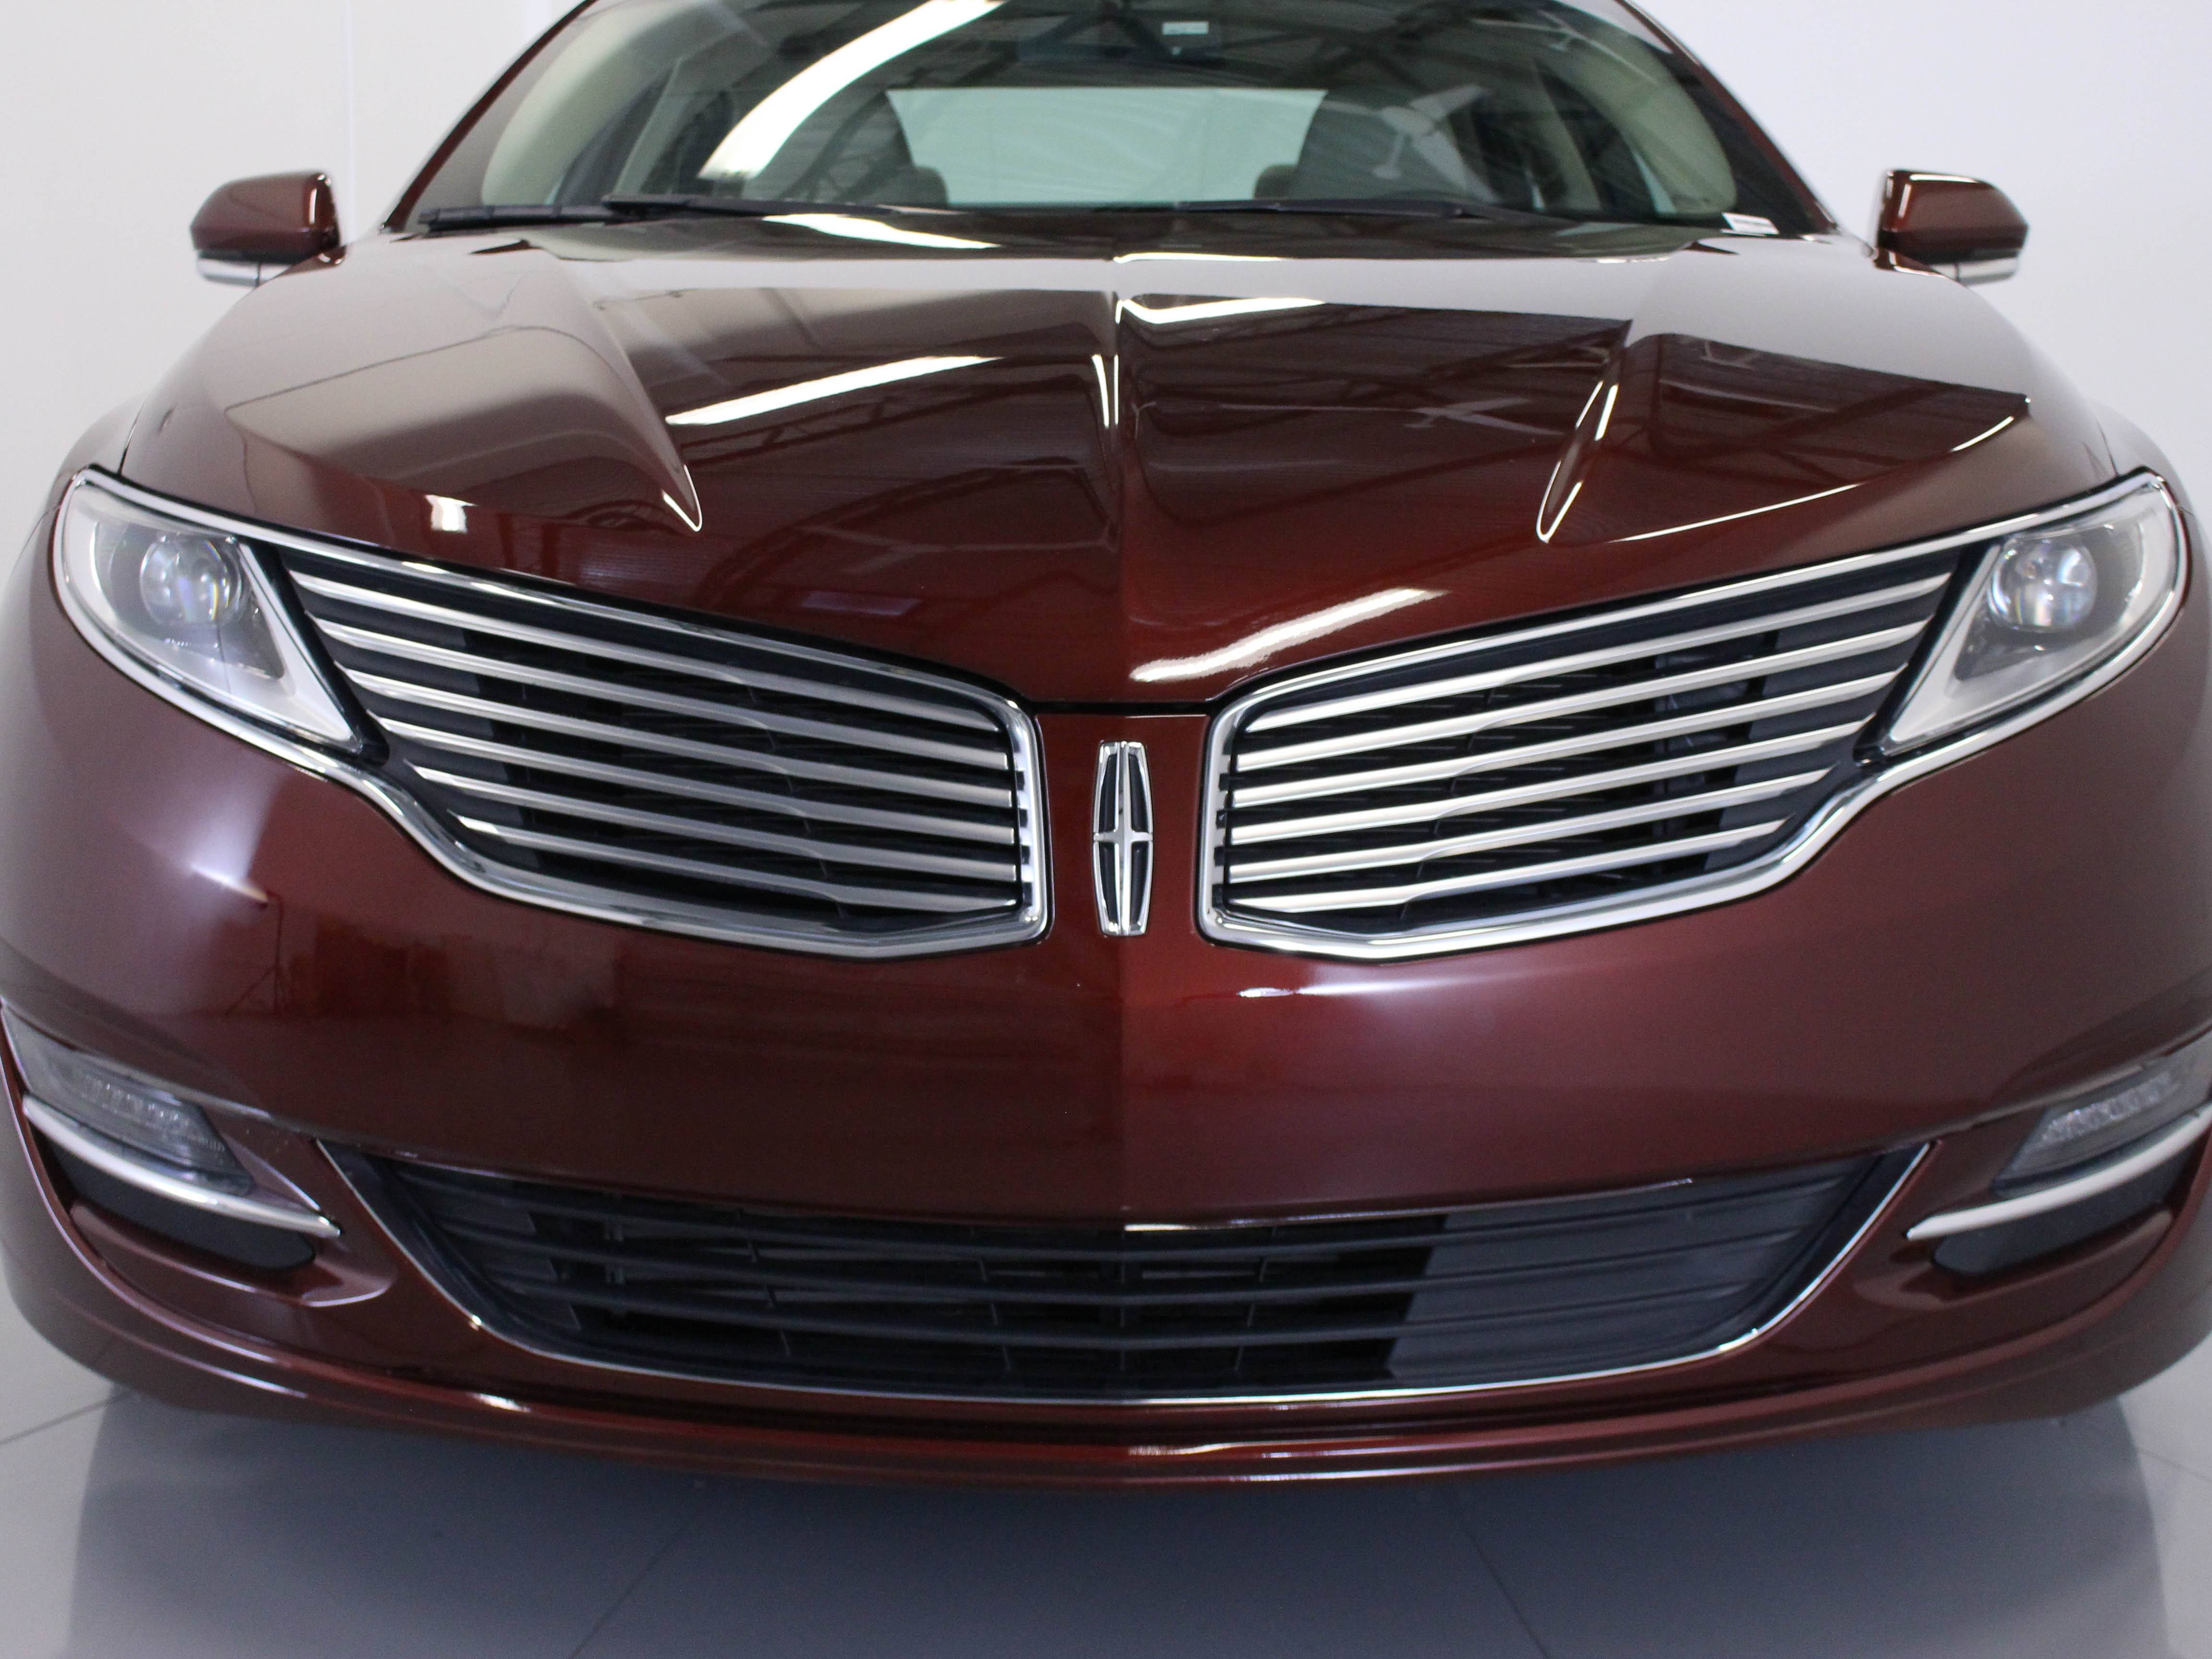 Florida Fine Cars - Used LINCOLN MKZ 2016 MARGATE 